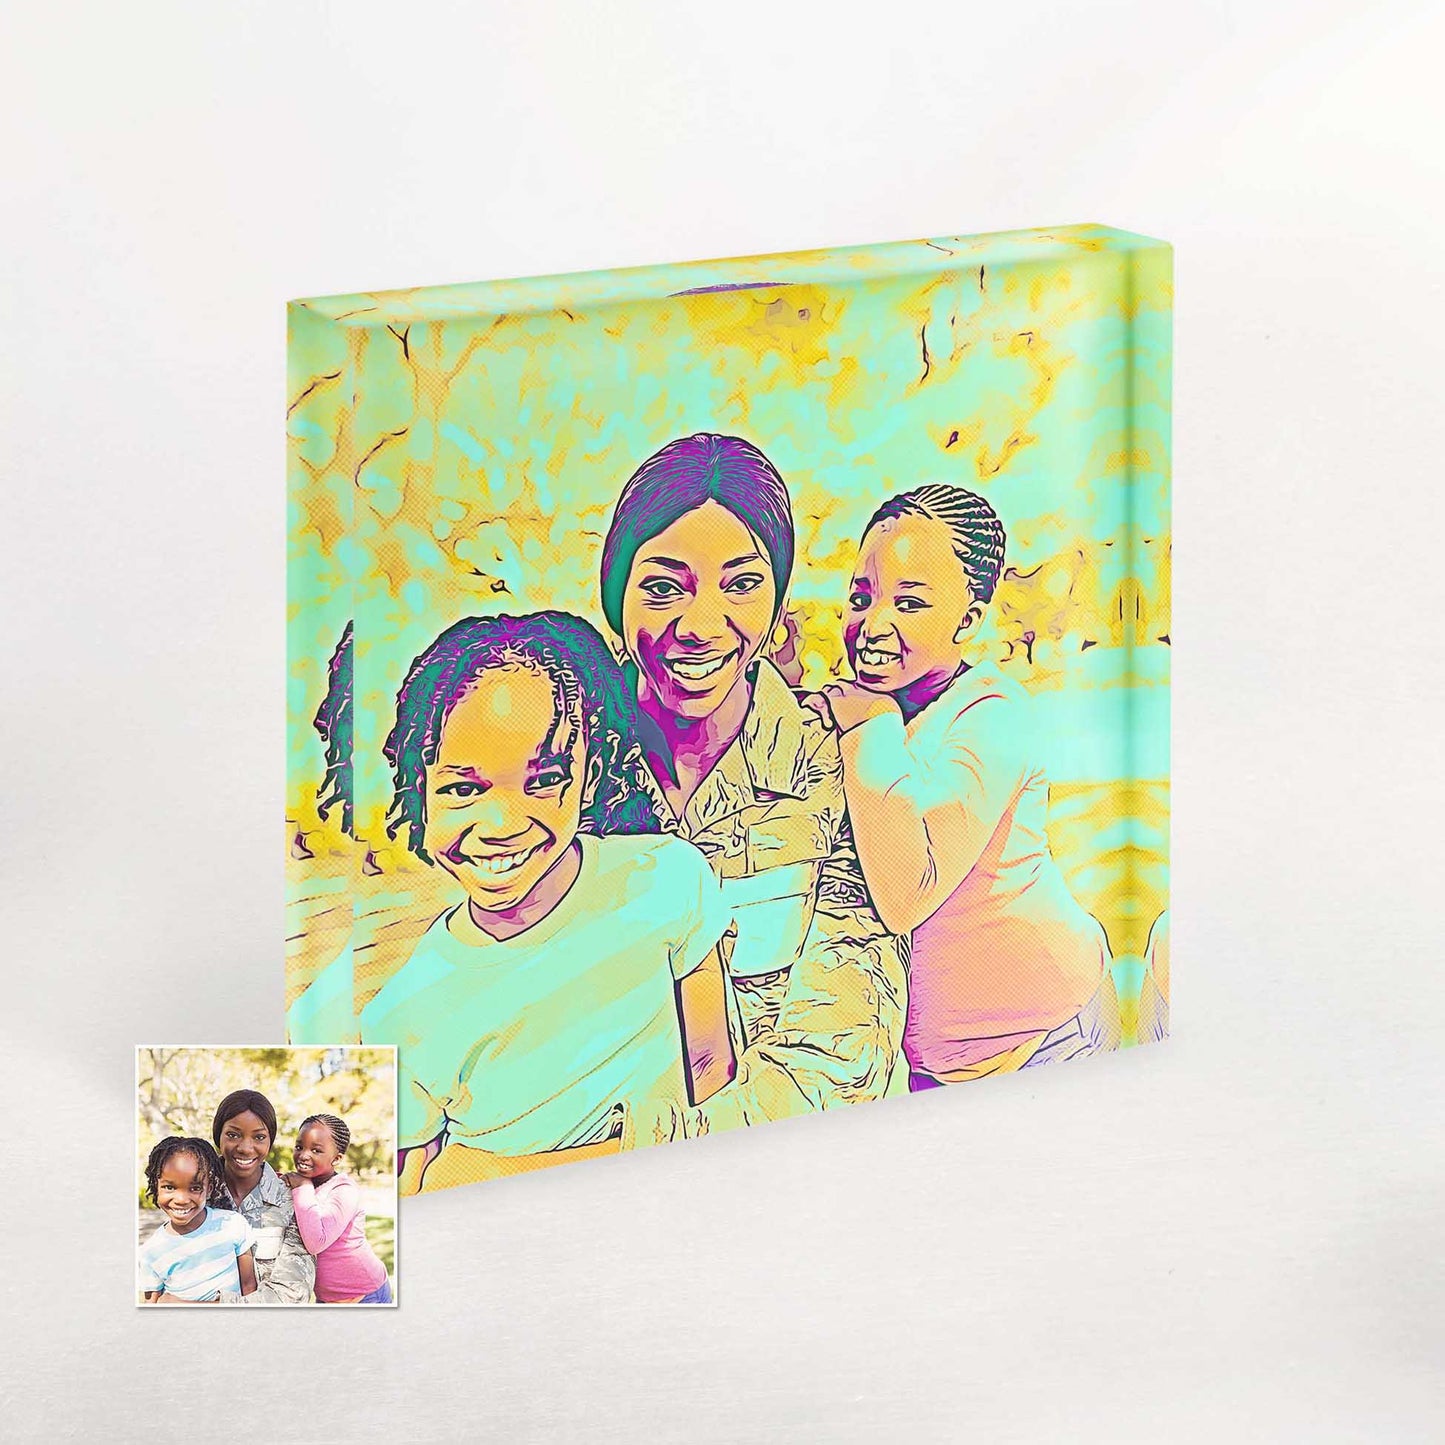 Give the gift of happiness with our Personalised Blue and Yellow Cartoon Acrylic Block Photo. This fun and exciting anniversary gift idea is designed to inspire smiles and warm hearts, creating a lasting impression on your family and friends.